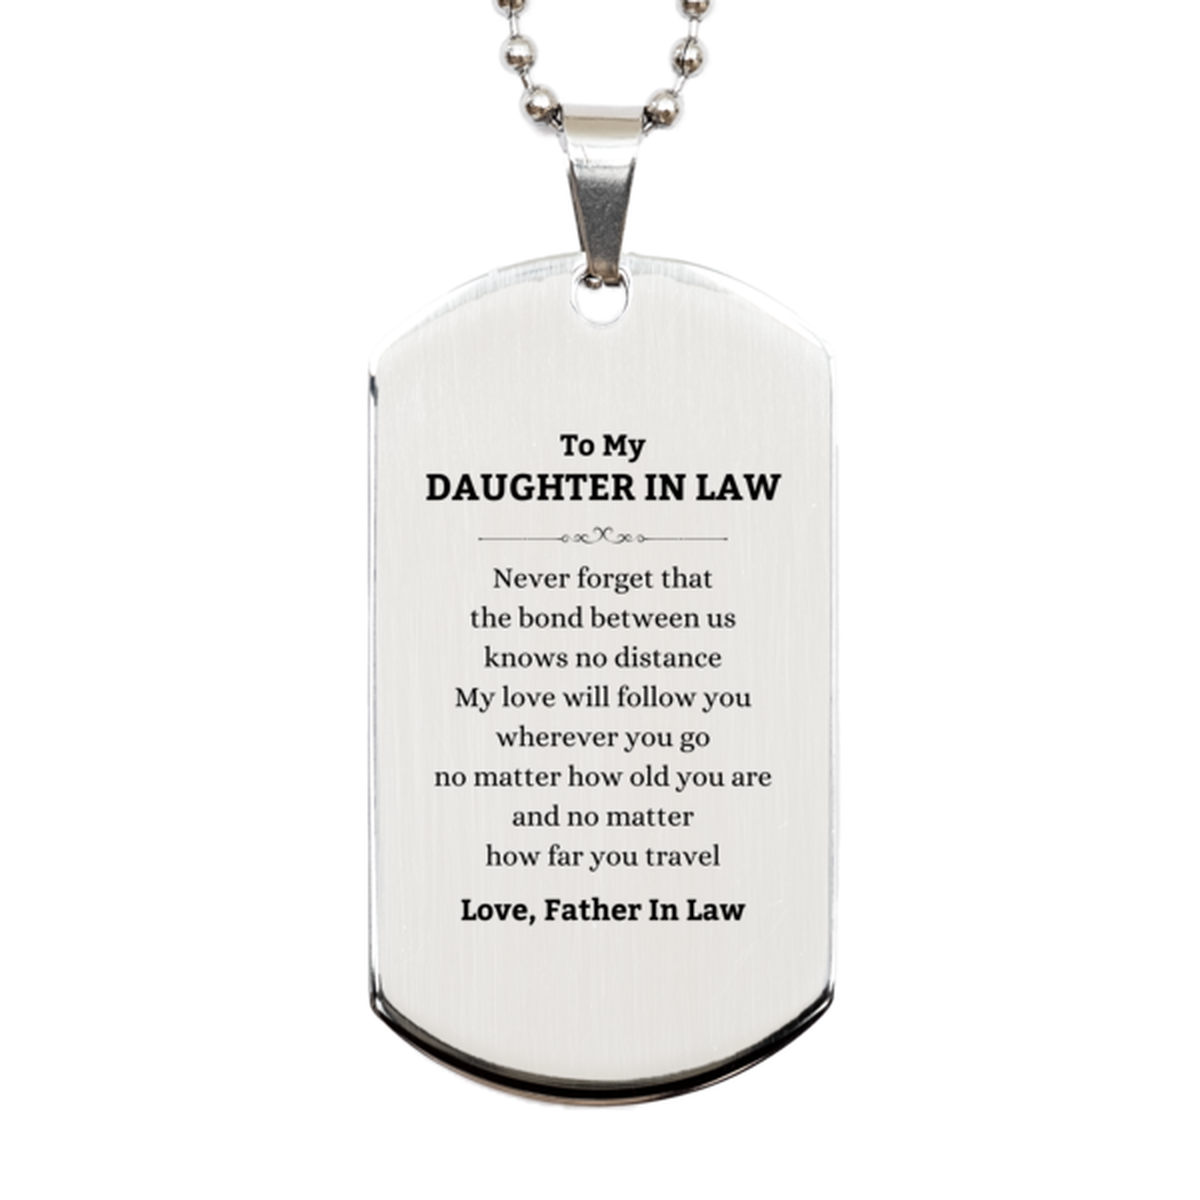 Daughter In Law Birthday Gifts from Father In Law, Adjustable Silver Dog Tag for Daughter In Law Christmas Graduation Unique Gifts Daughter In Law Never forget that the bond between us knows no distance. Love, Father In Law